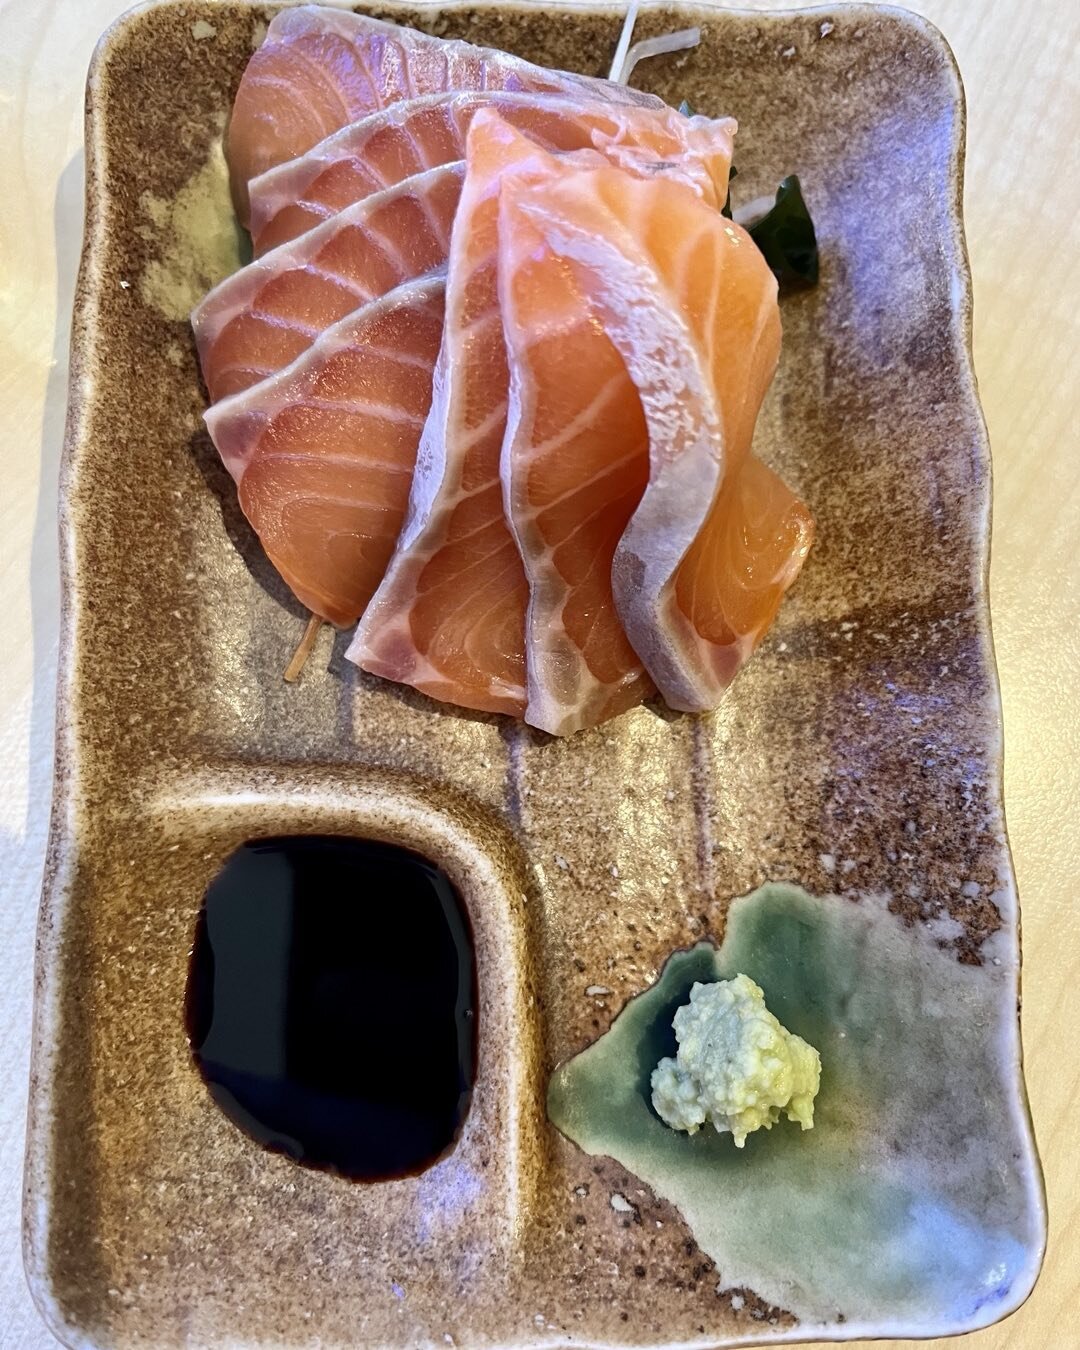 Salmon sashimi @abenookonomi. More than just raw fish at this venue though. Superb savoury pancakes too. Full review on my website. 

#foodstagram #eatstagram, #instafood #foodforthought #foodlover #foodlove #foodblogger #foodgasm #foodporn #lovetoea